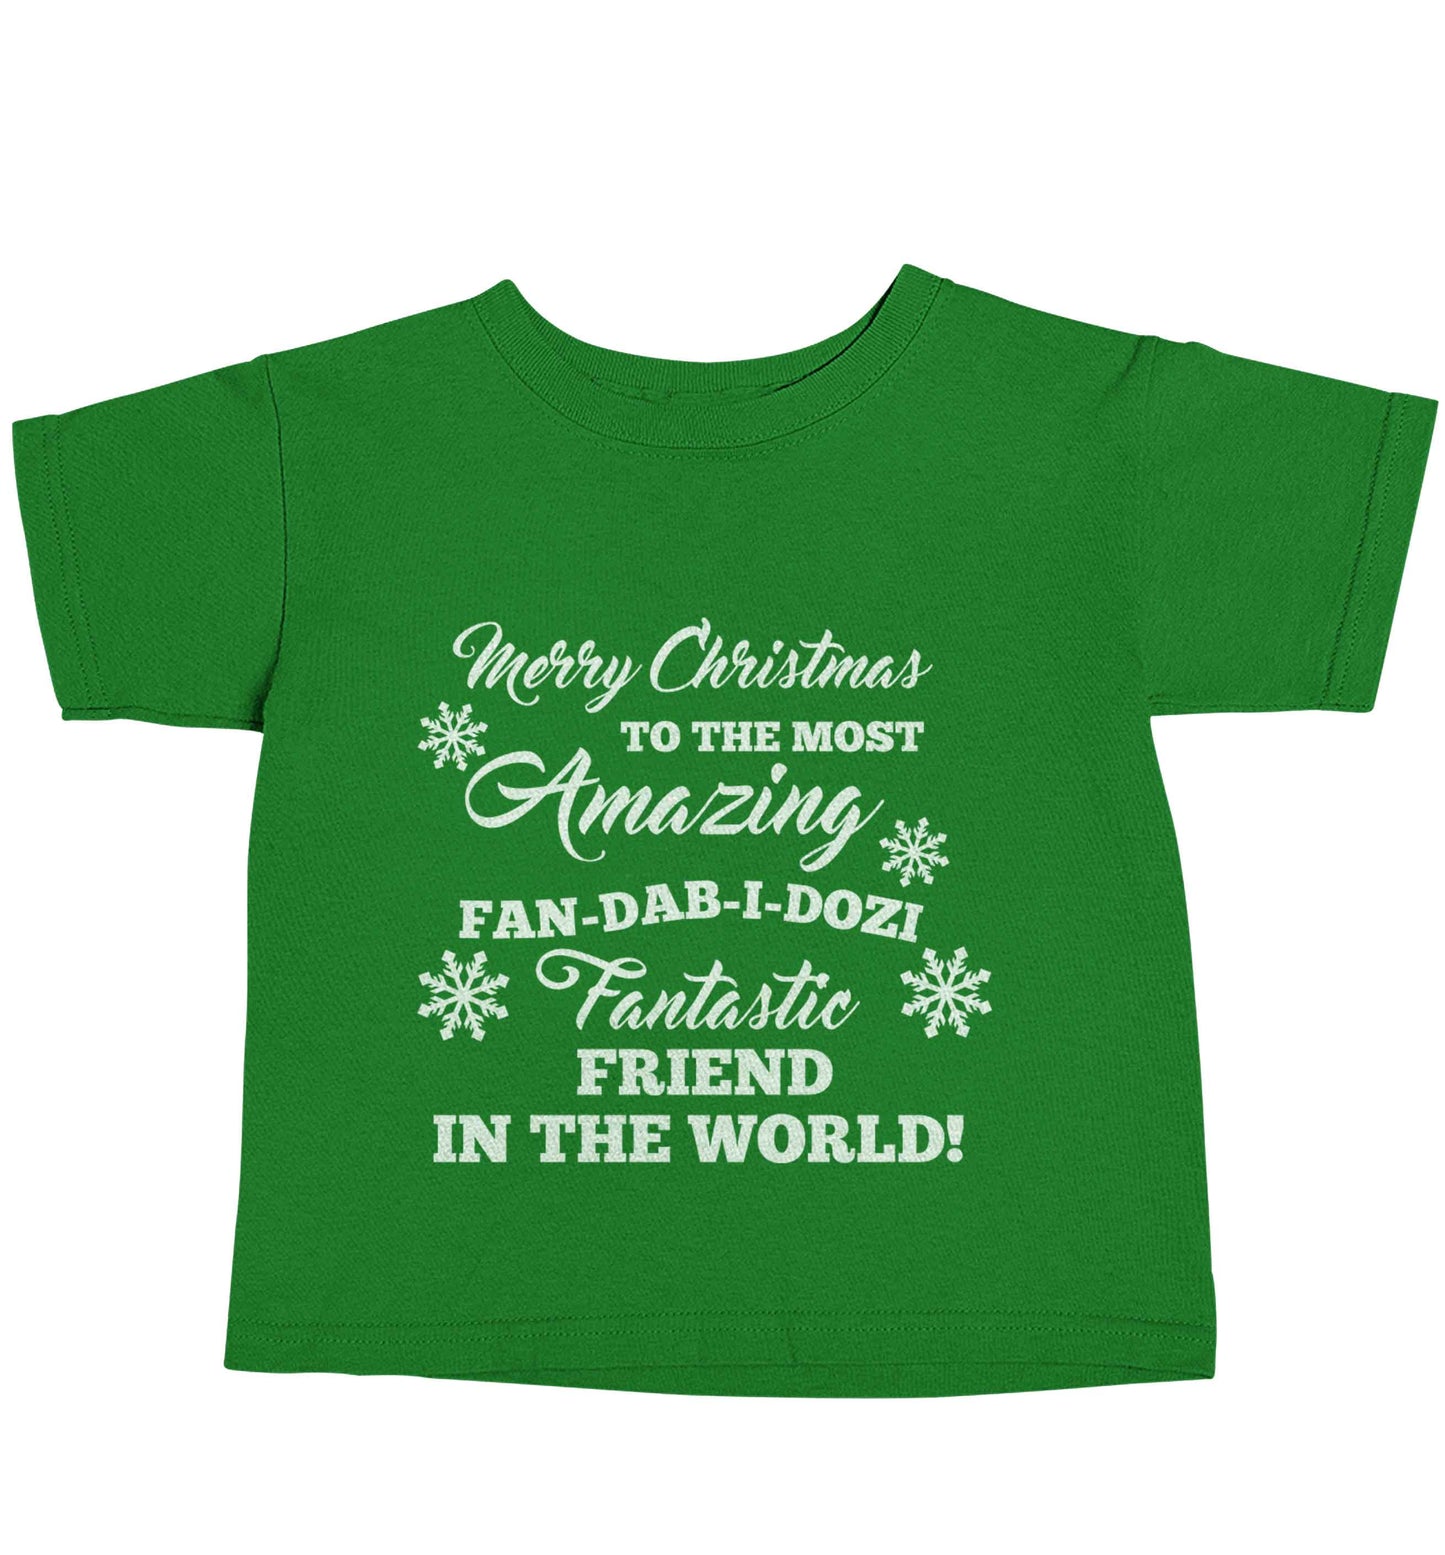 Merry Christmas to the most amazing fan-dab-i-dozi fantasic friend in the world green baby toddler Tshirt 2 Years